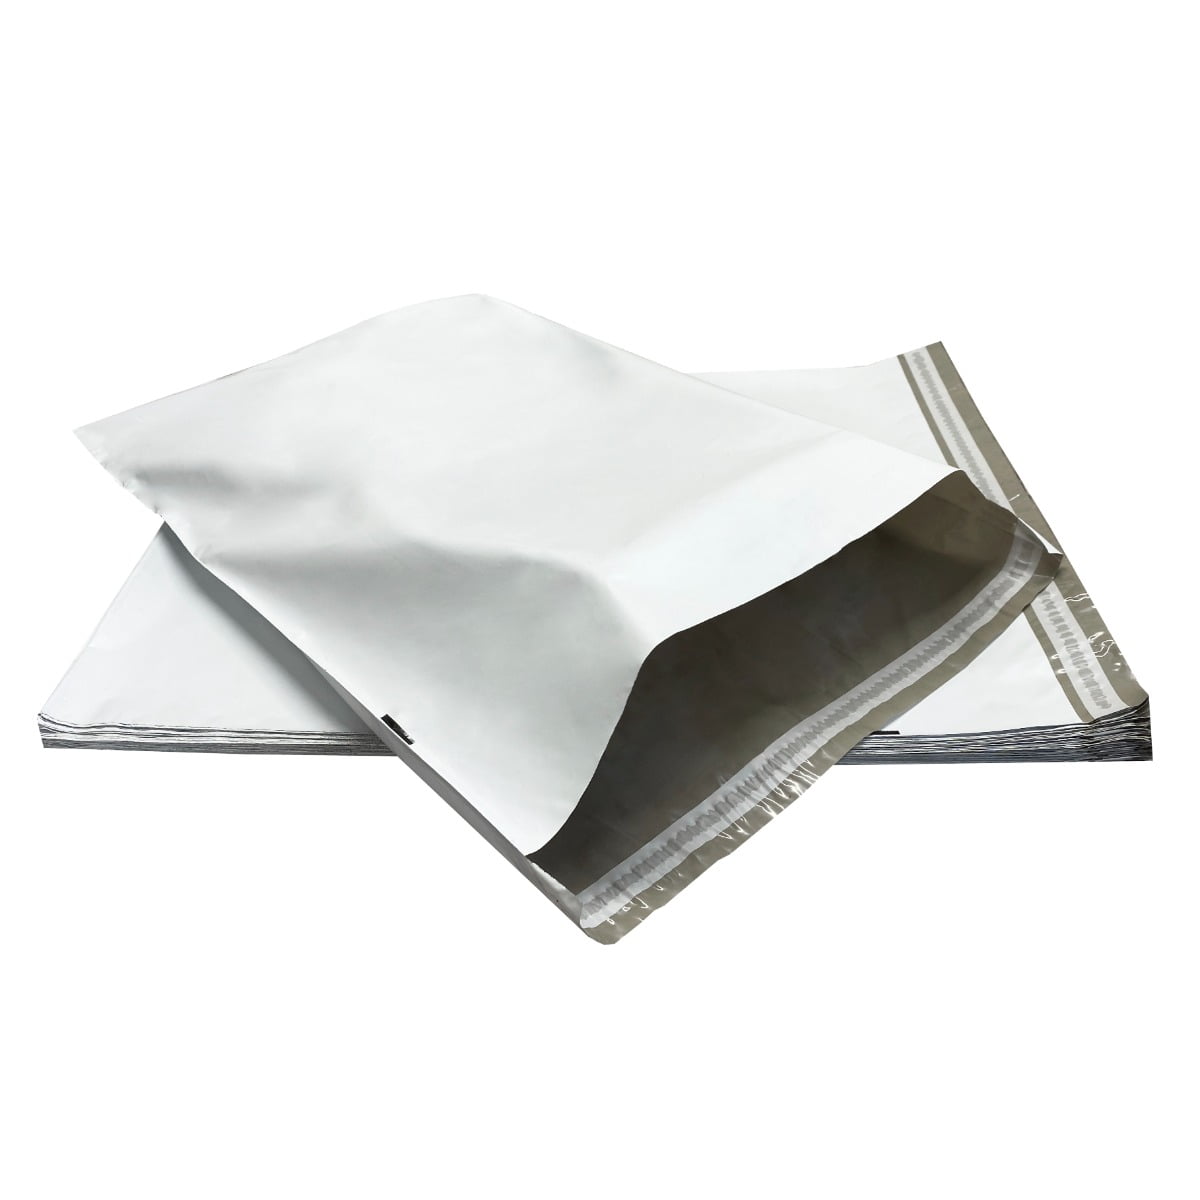 White, 19 x 24 inch Poly Mailer 200 Mailing Bags Plastic Mail Envelope for Shipping 3 Mil Postal Bags